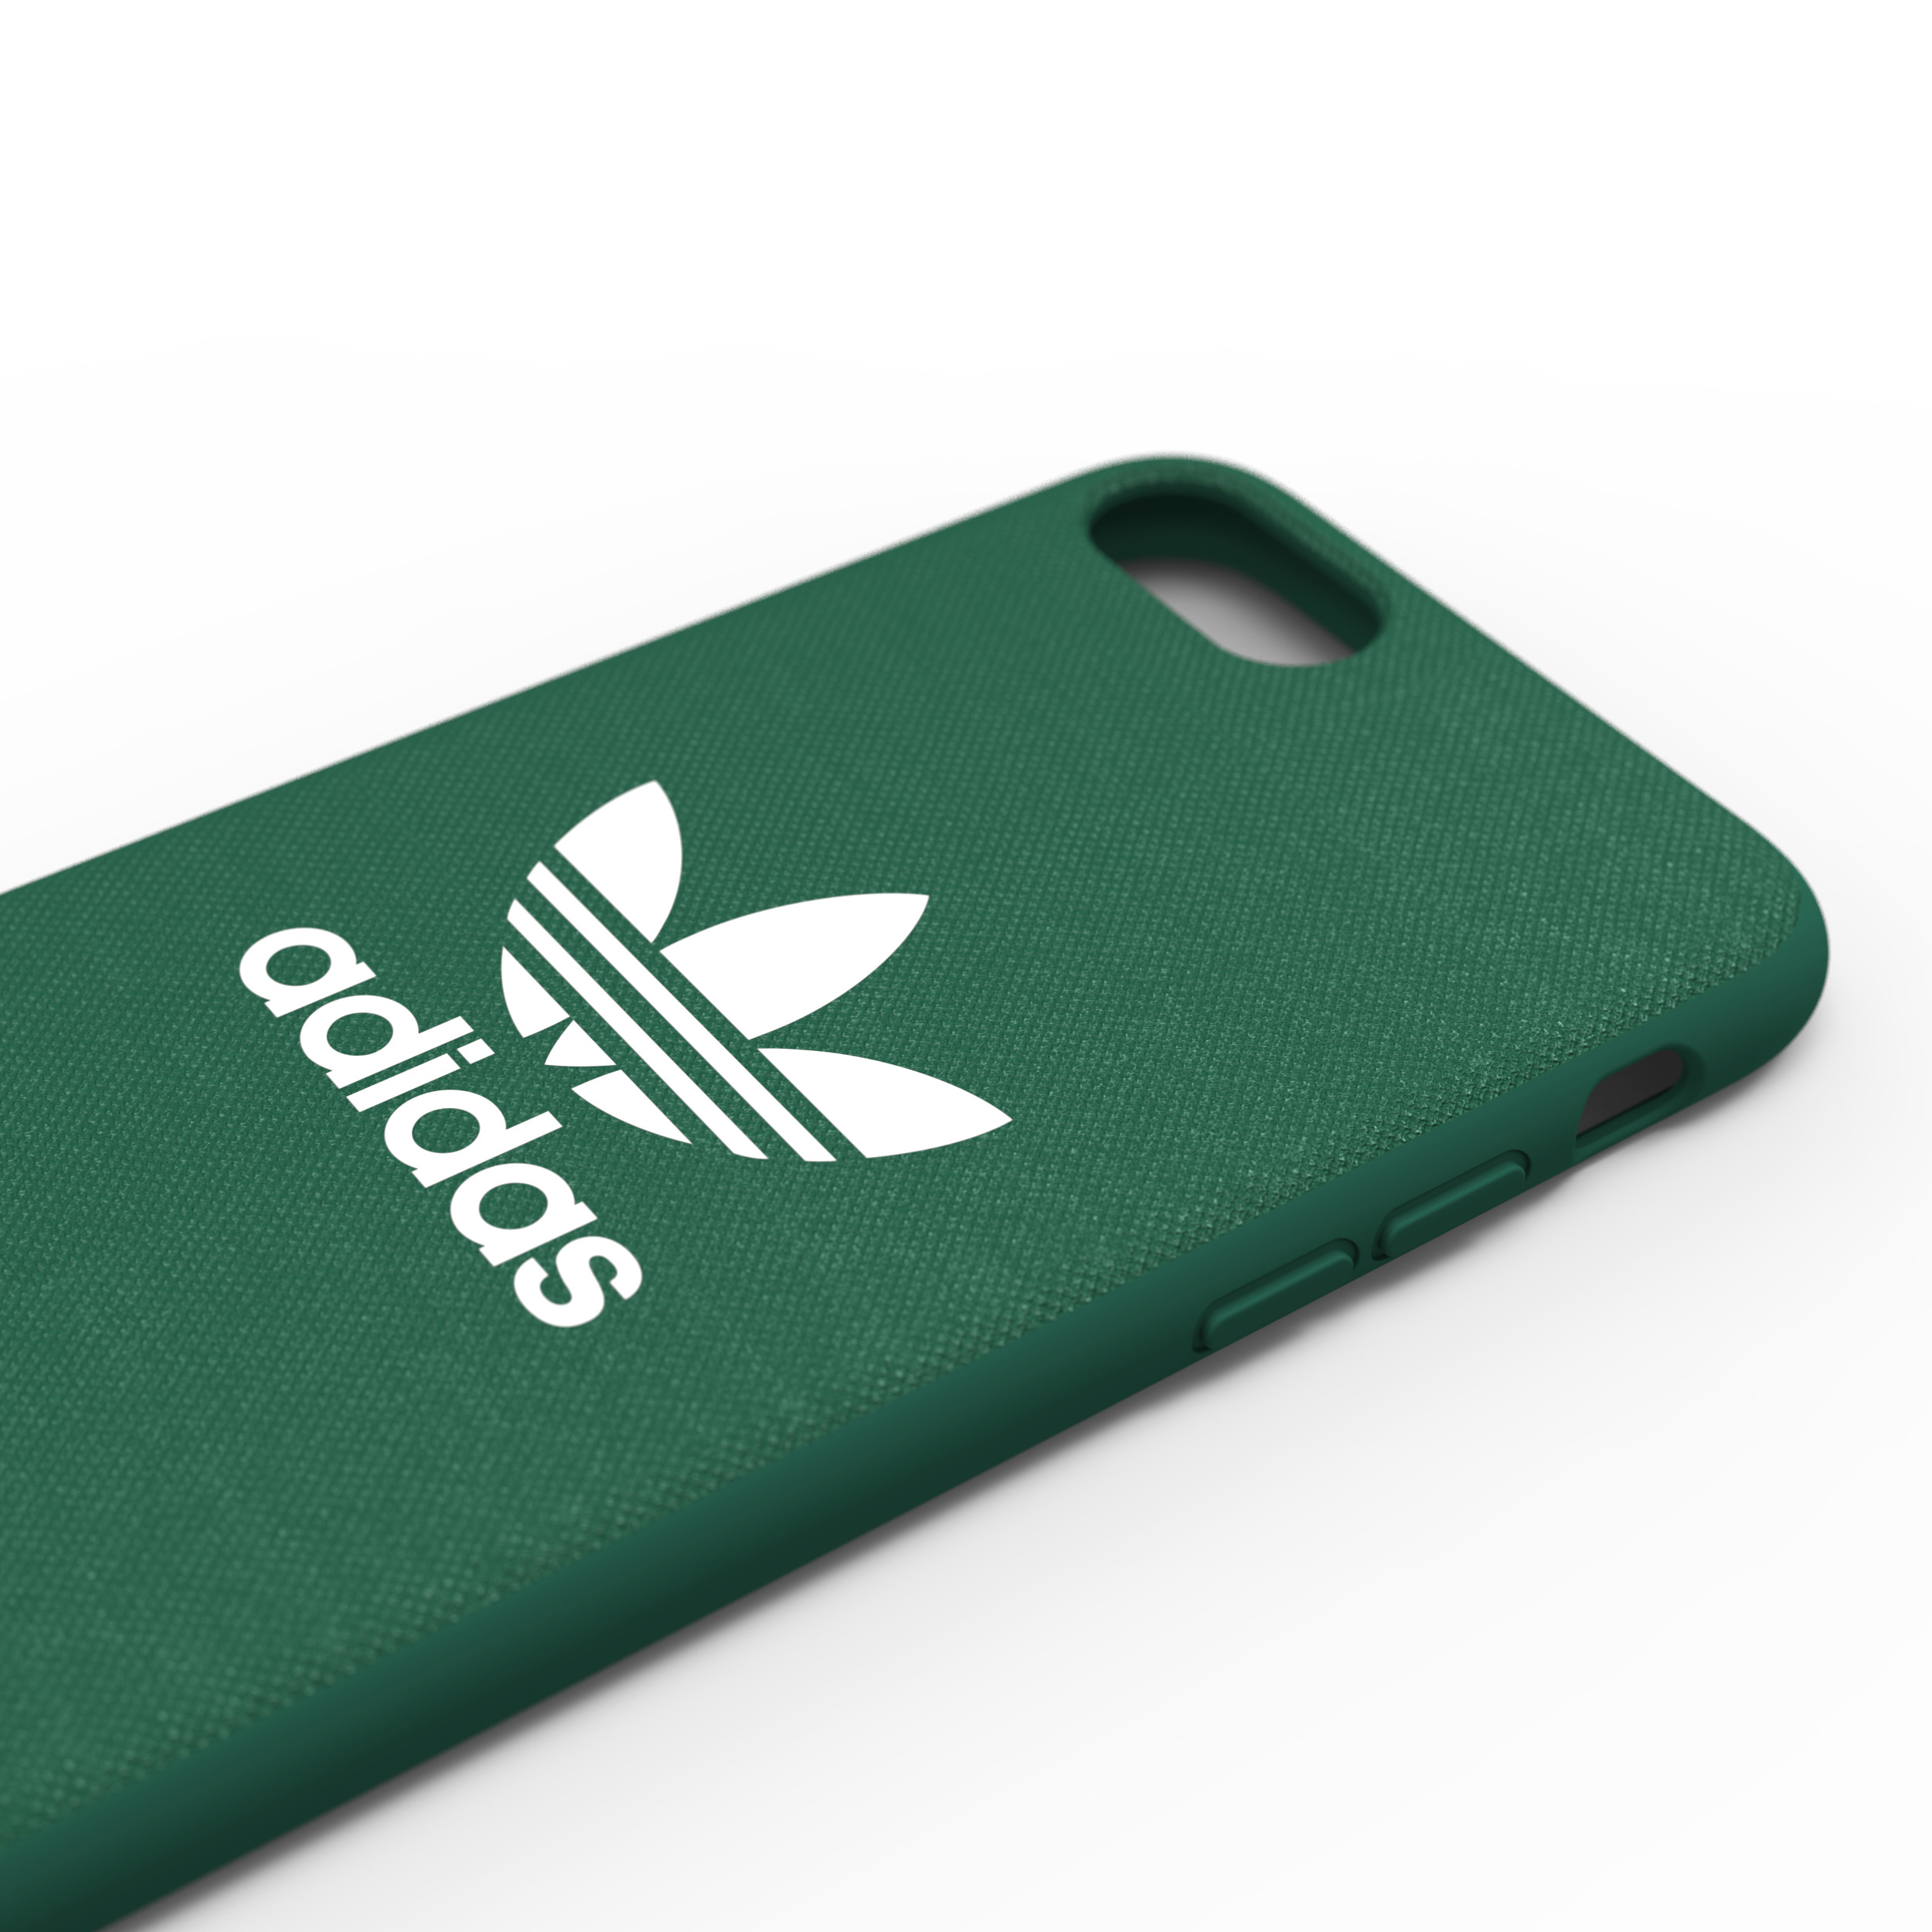 ADIDAS ORIGINALS 7, 8, GREEN, IP 8 7 iPhone Grün MOULDED iPhone Apple, Backcover, 29934 6 6, CASE OR iPhone